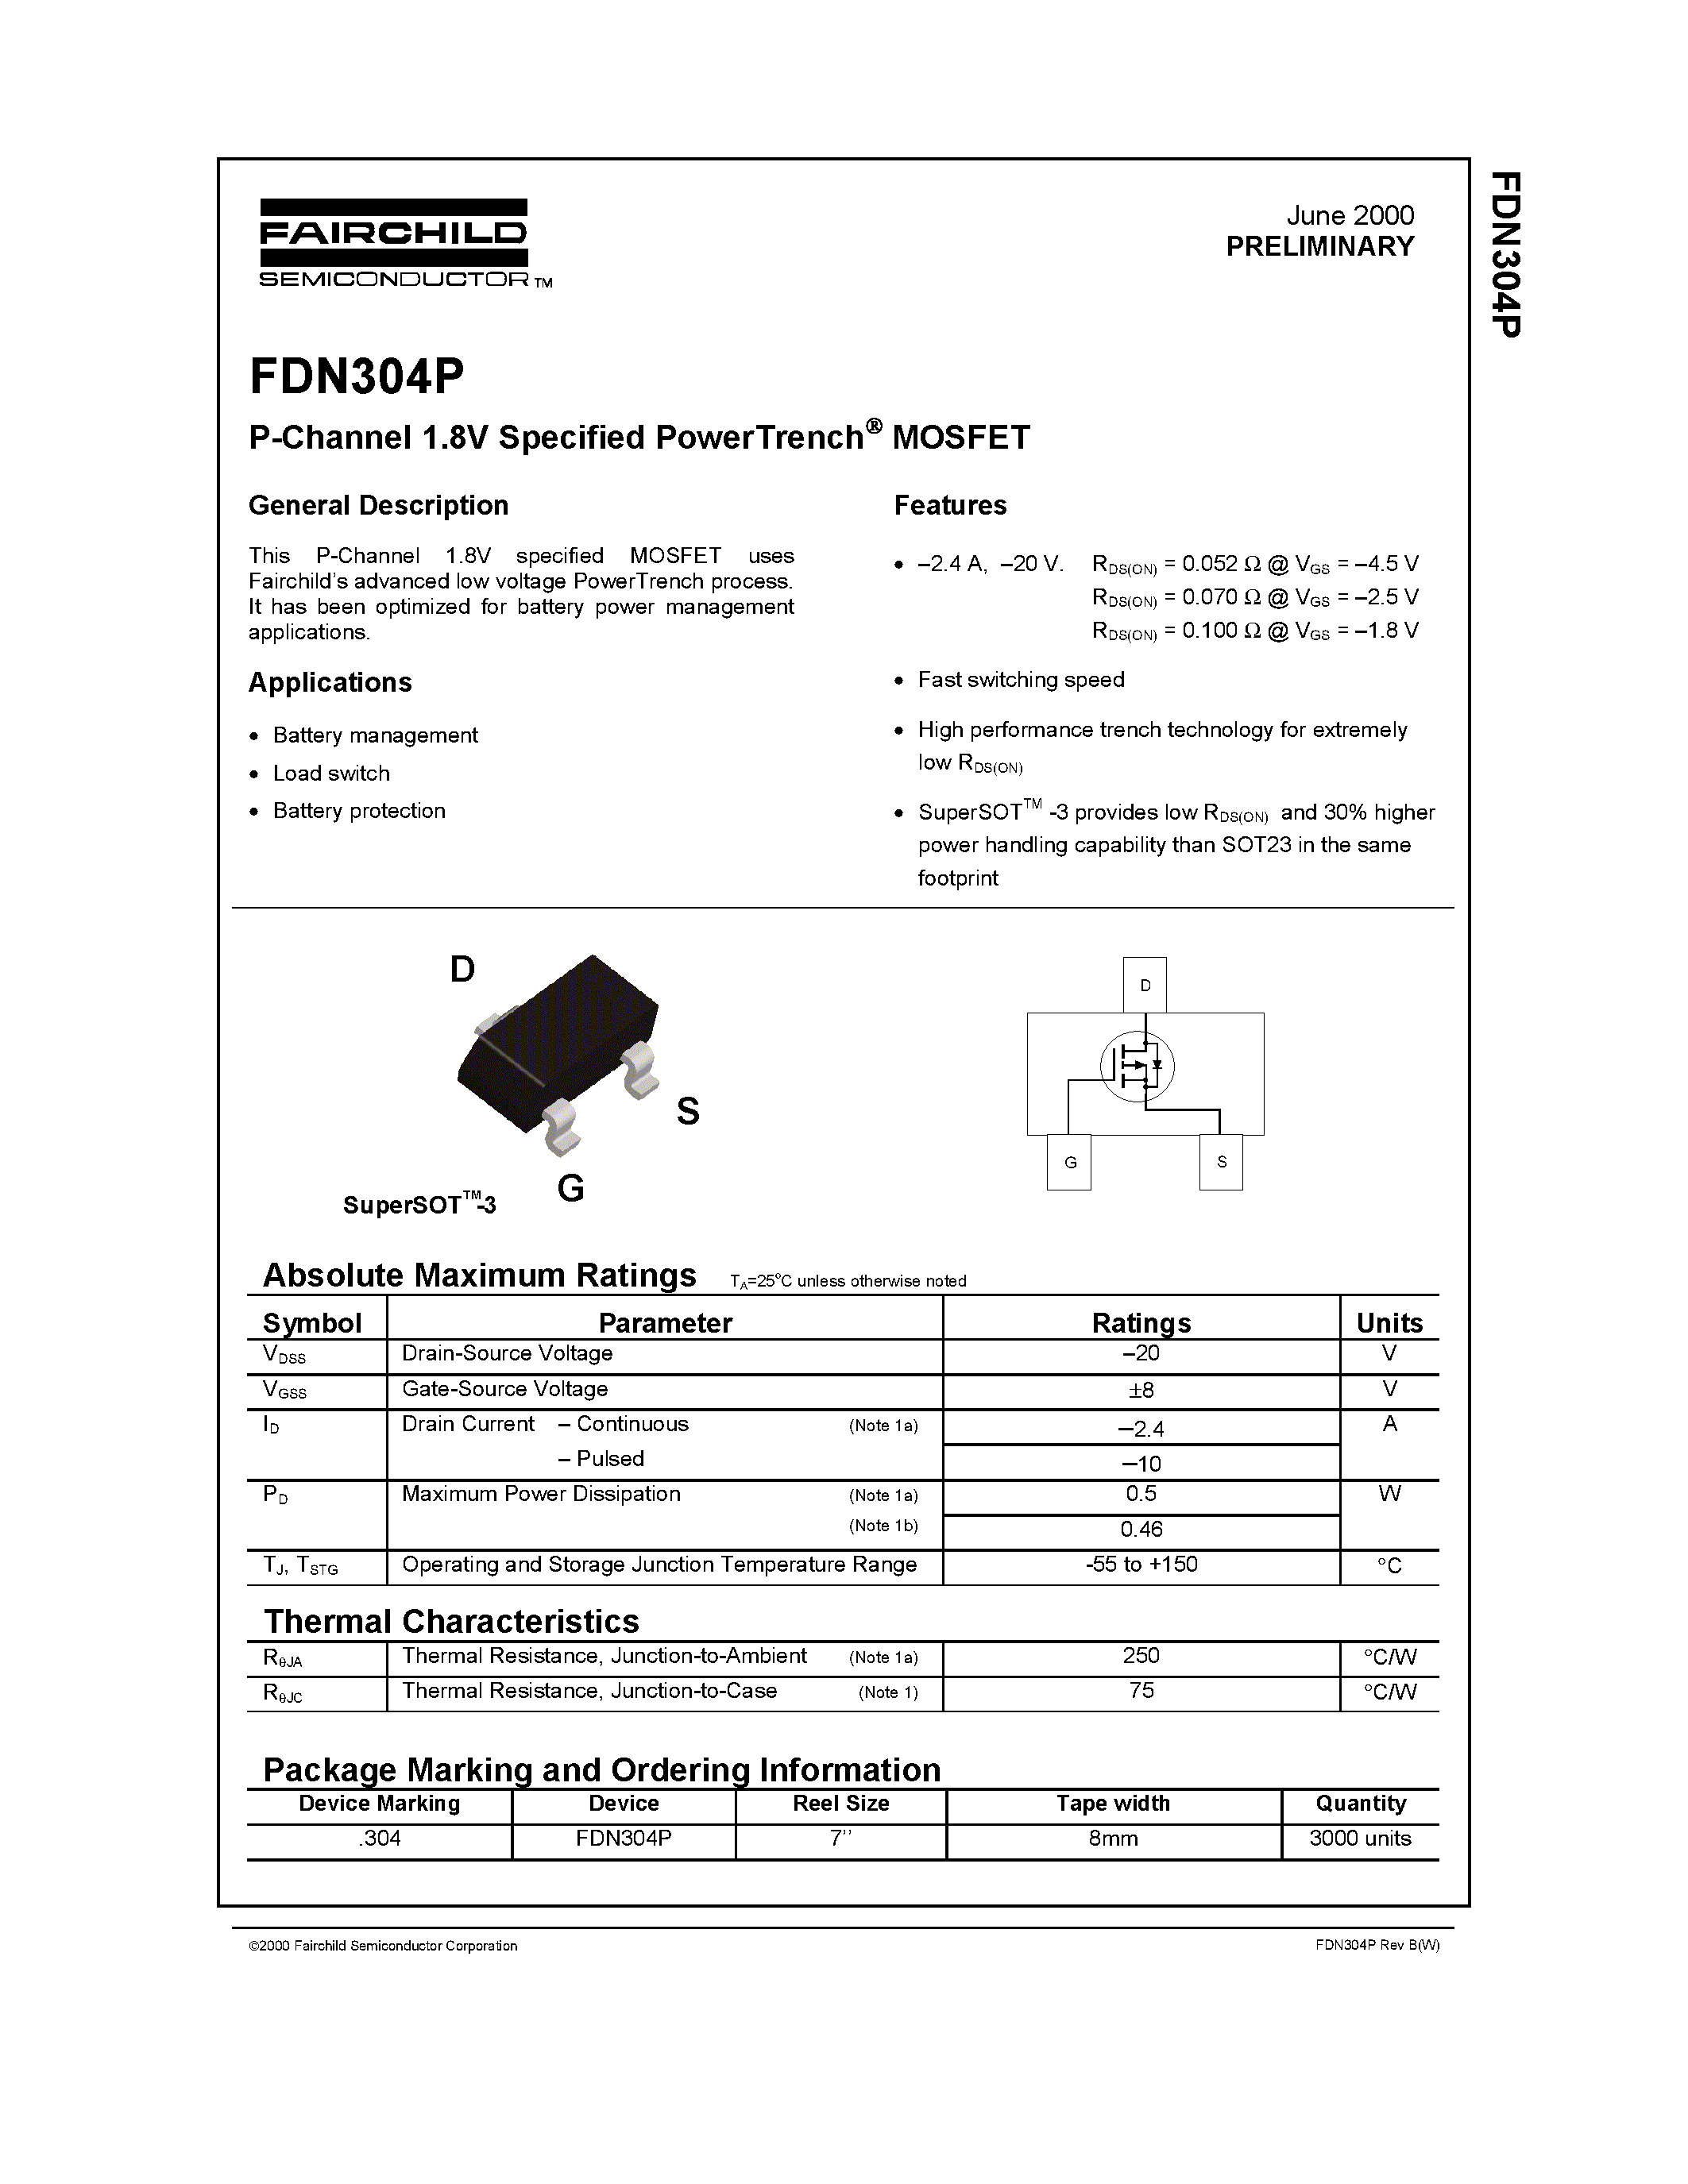 Datasheet FDN304P - P-Channel 1.8V Specified PowerTrench MOSFET page 1